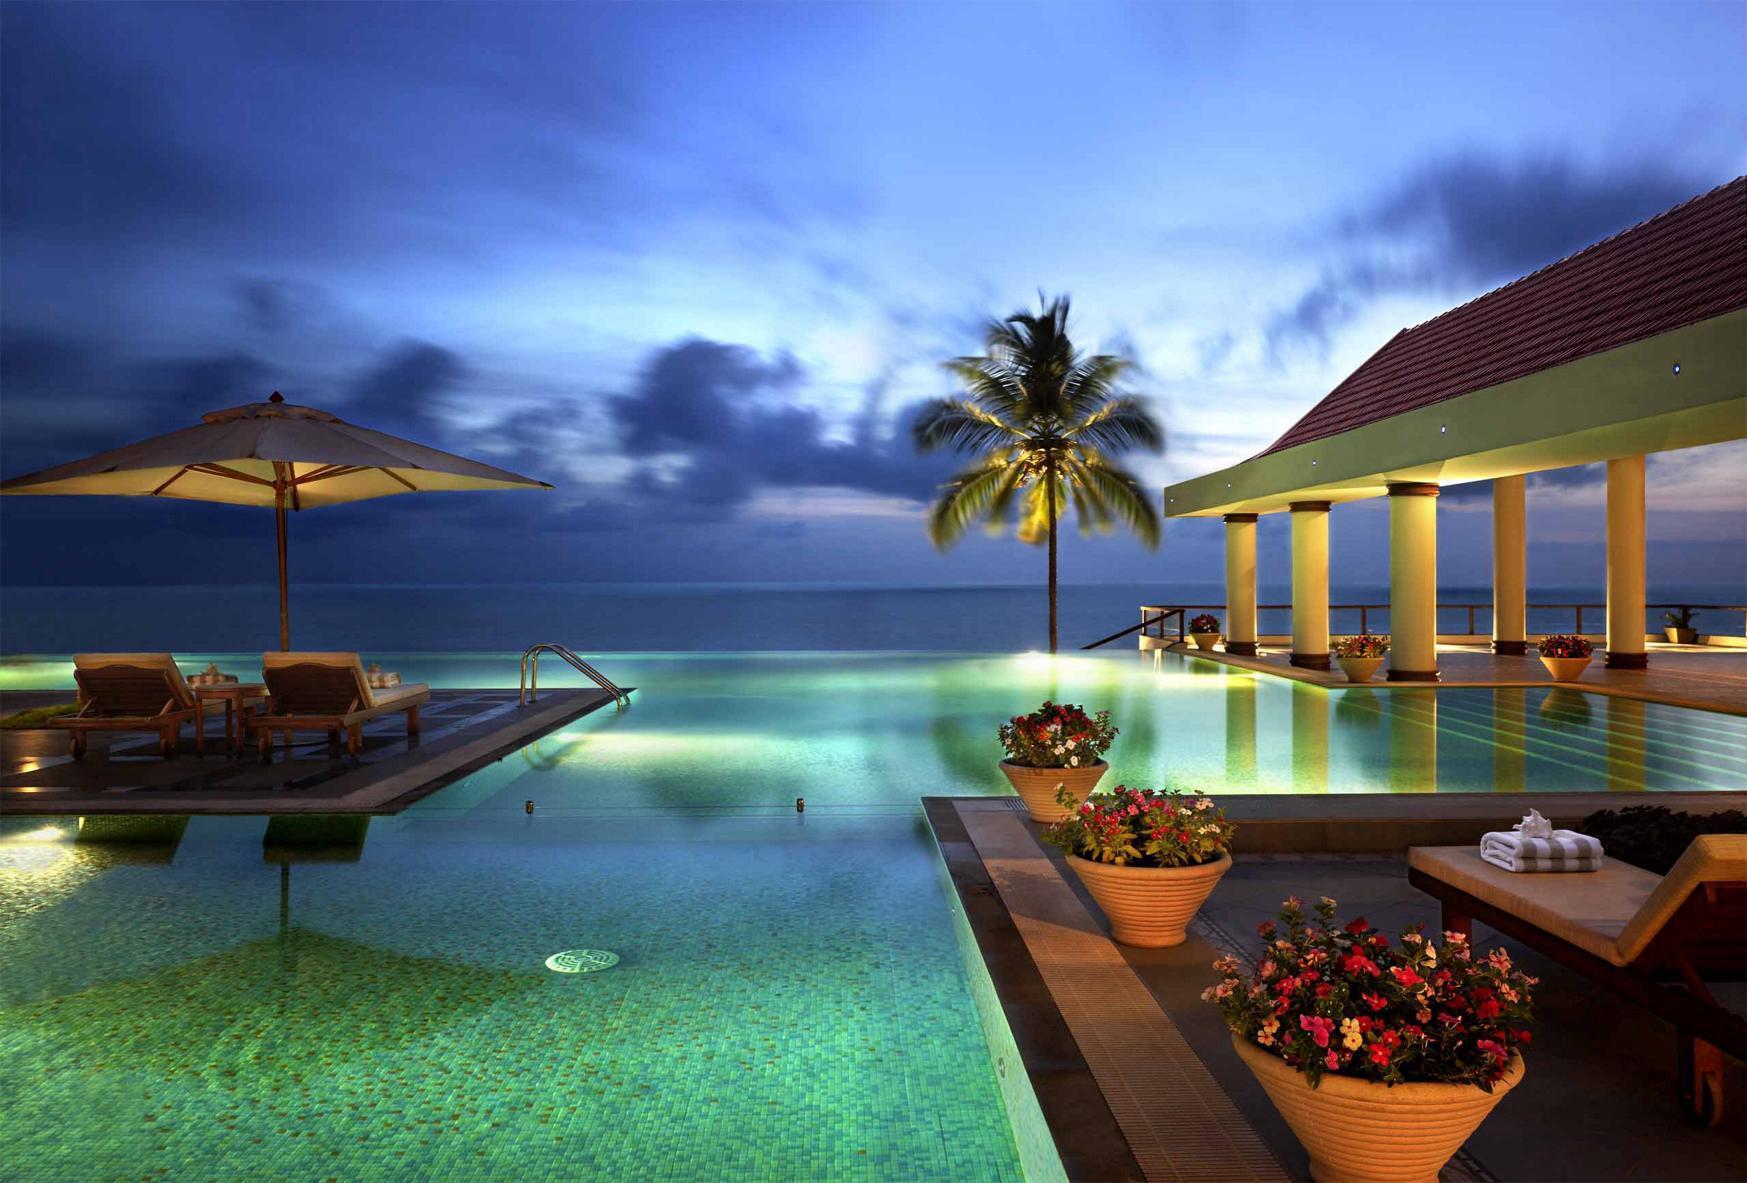 Hotels on the beach in Phuket, Thailand wallpaper and image